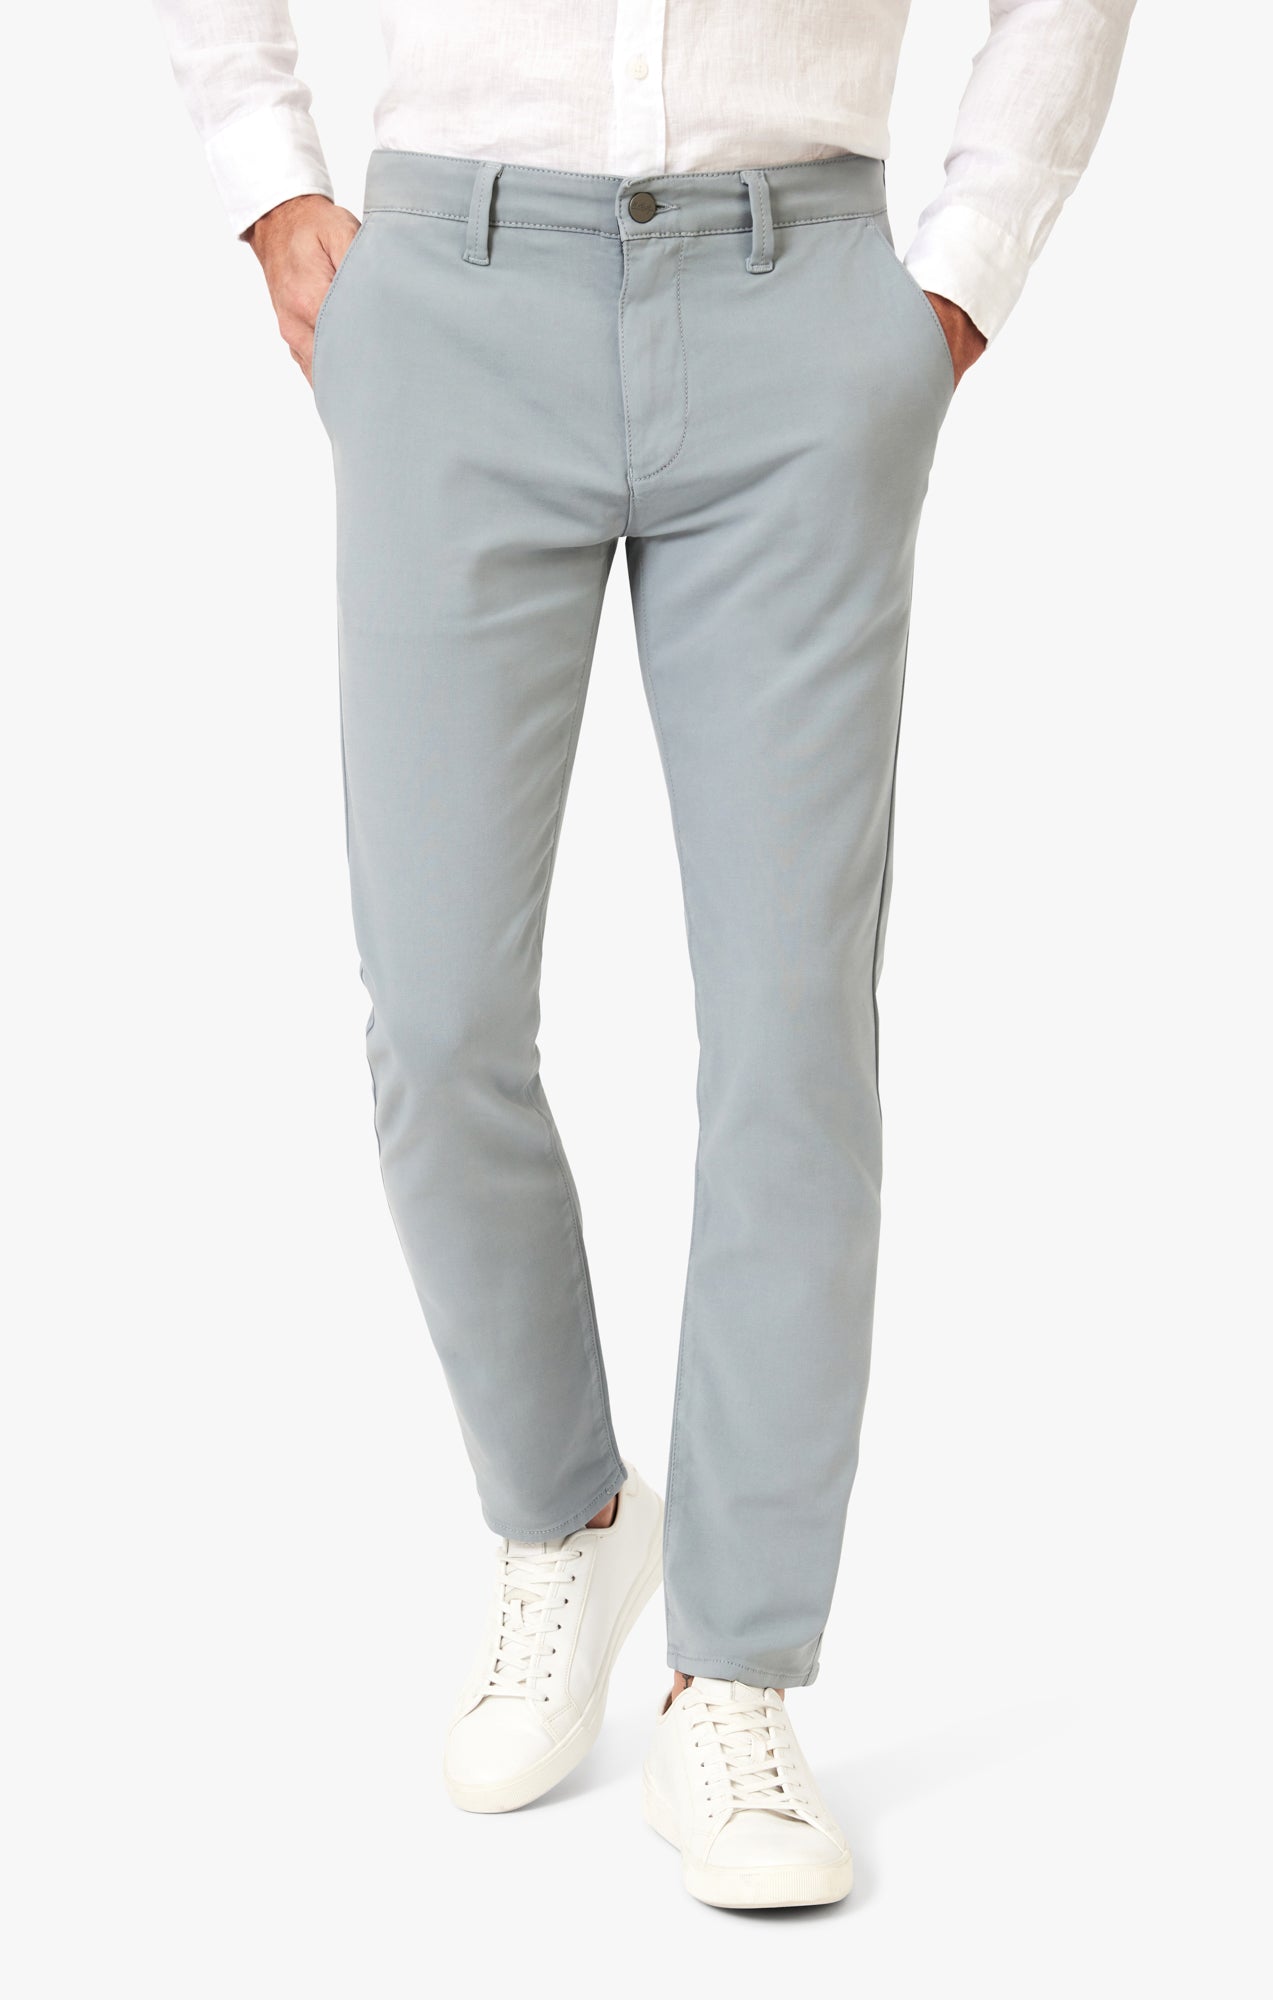 Skinny Fit Cotton Chinos - Gray - Men | H&M US